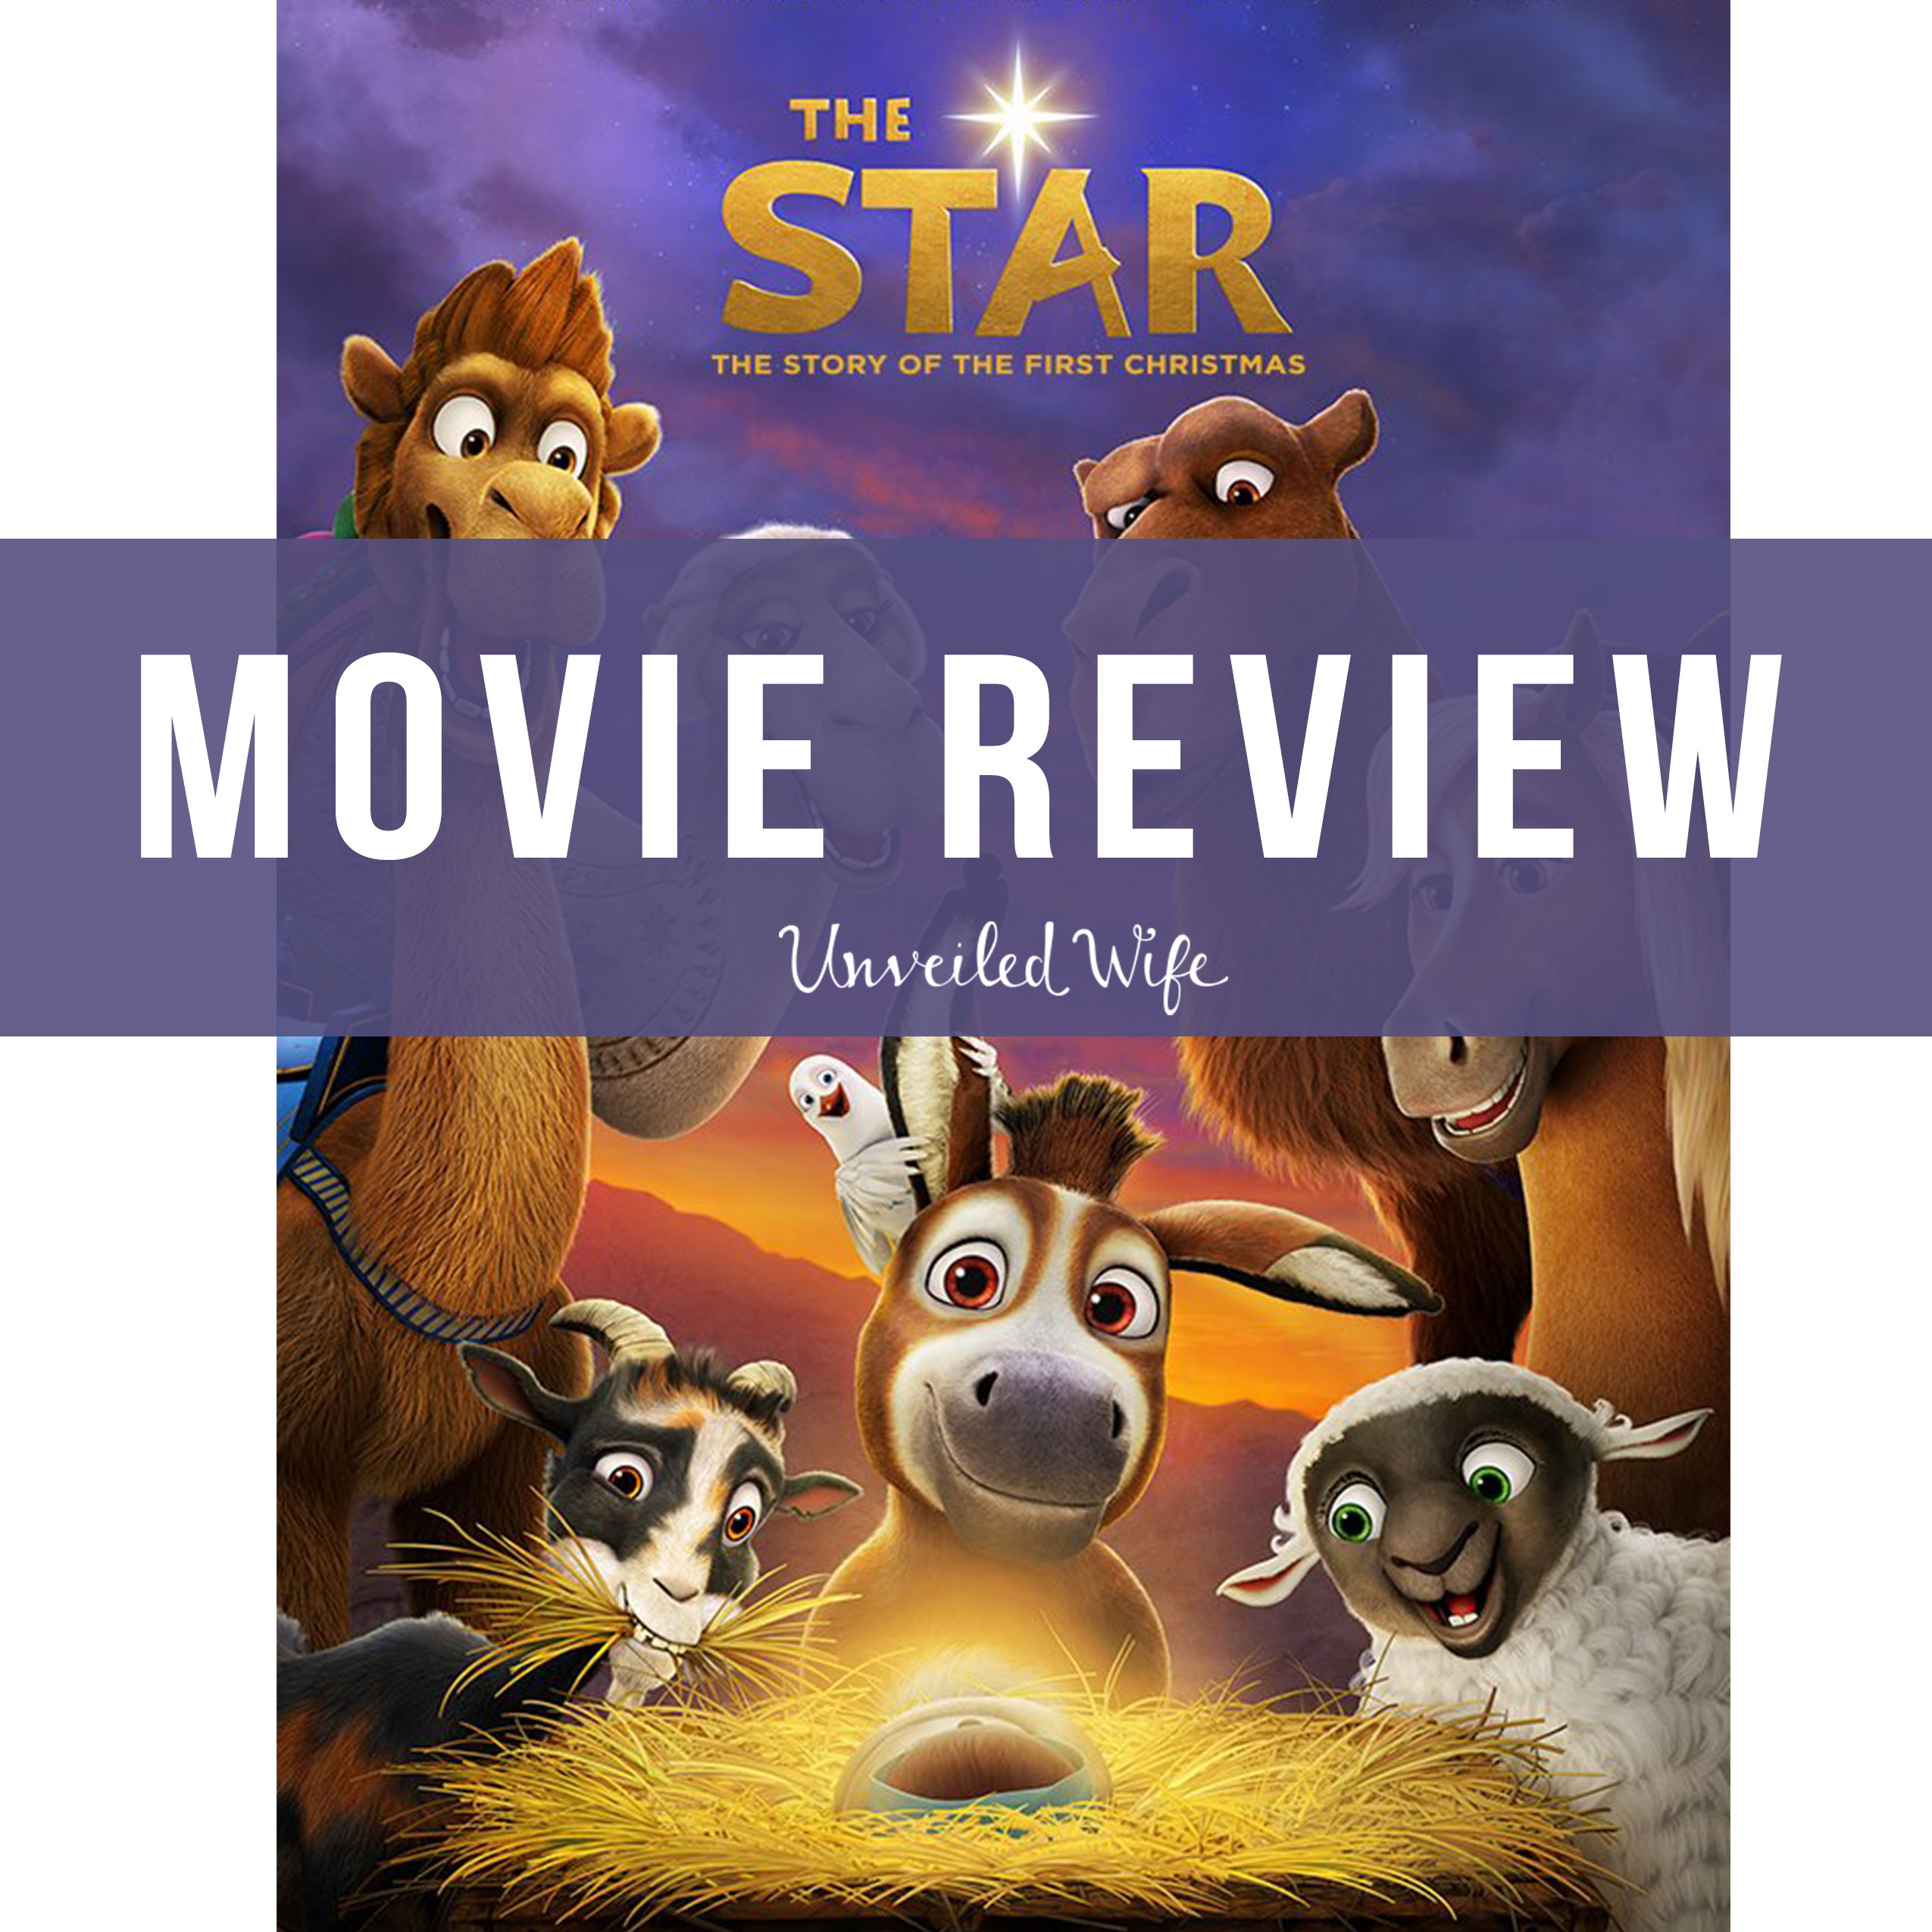 The Star: Movie Review